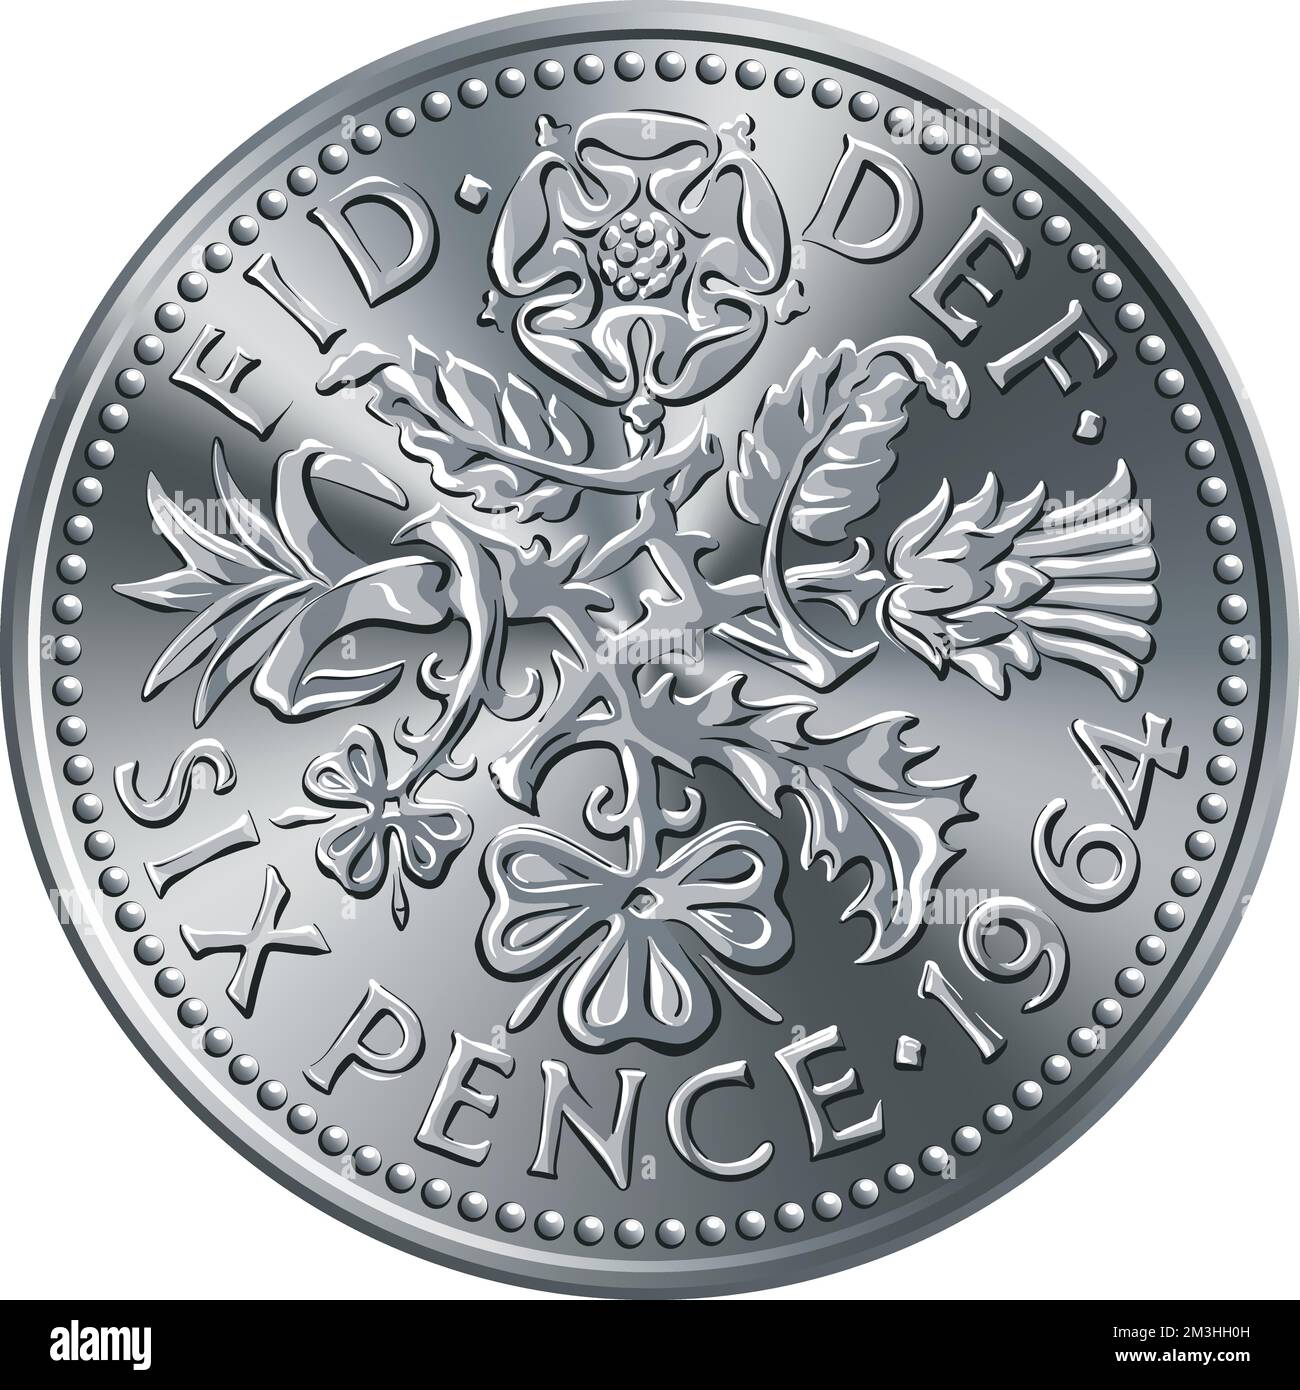 British sixpence money coin, reverse with floral design Stock Vector